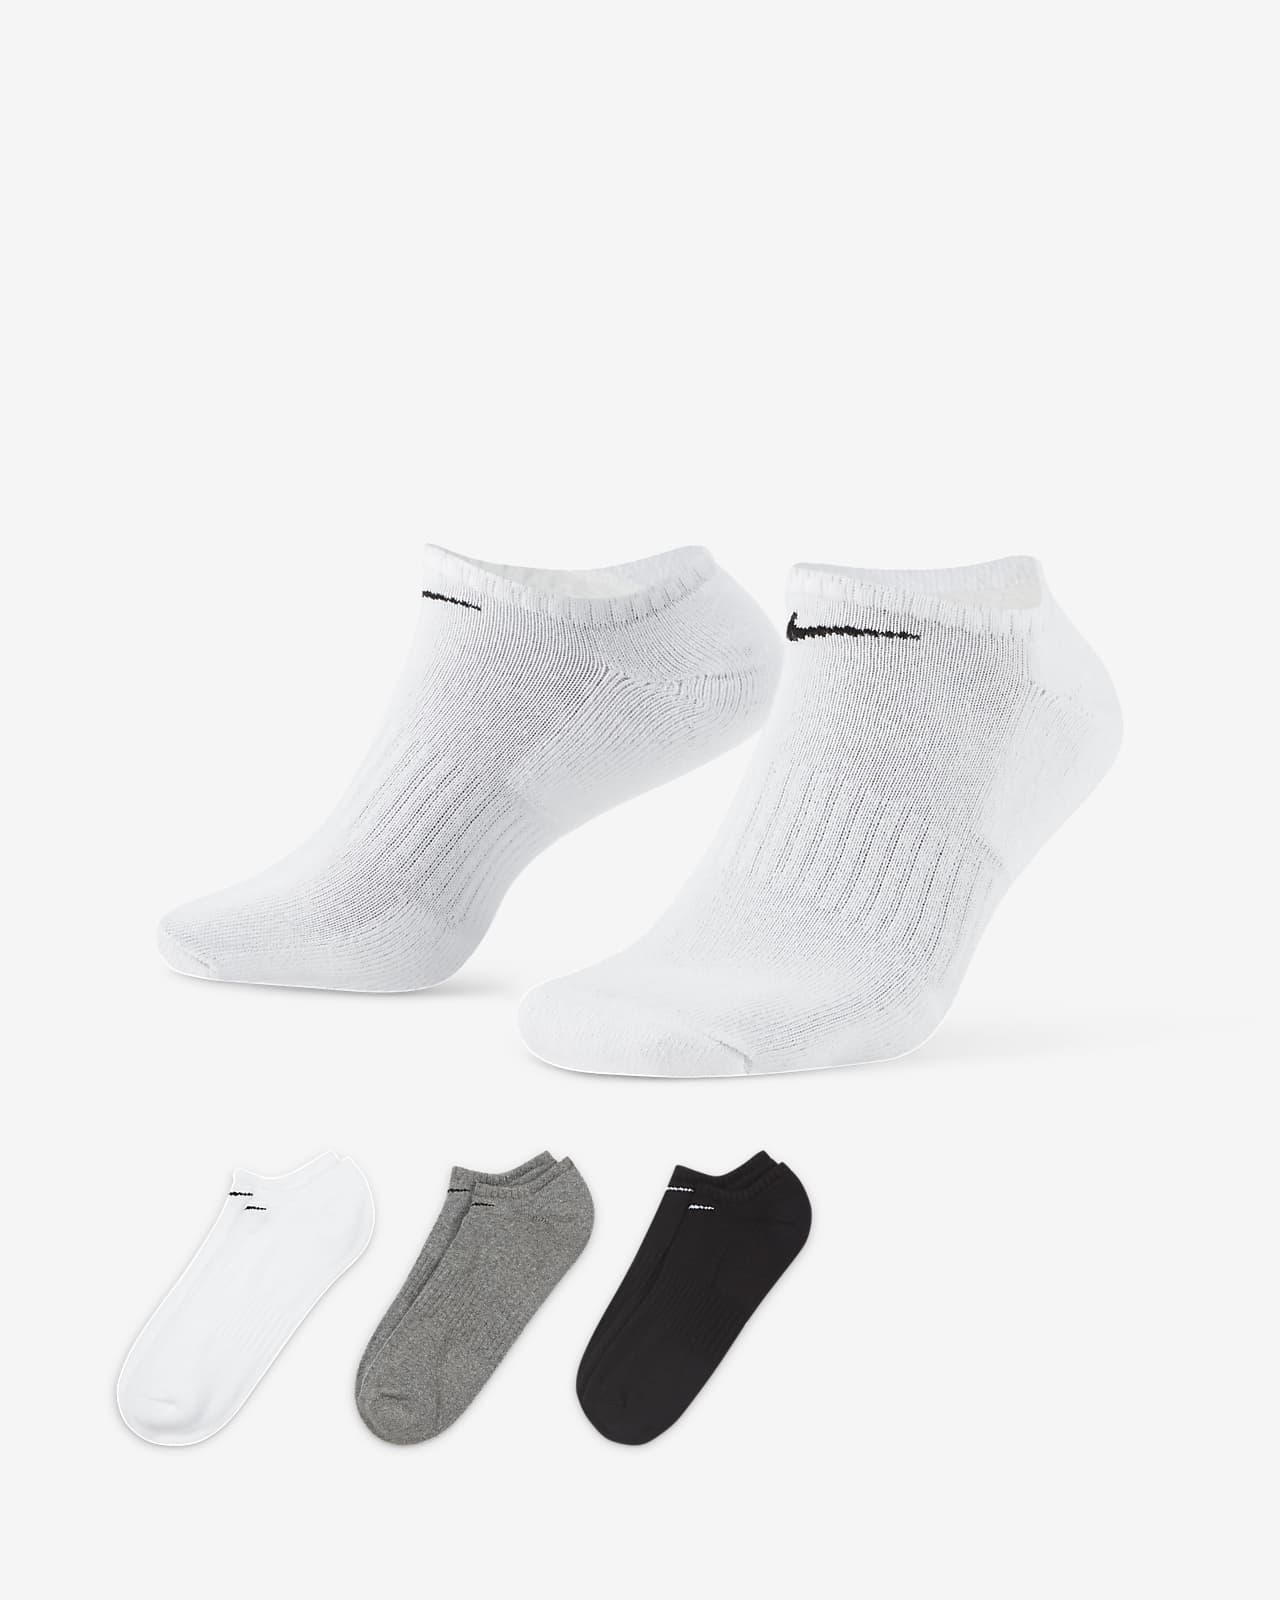 Chaussettes de training invisibles Nike Everyday Cushioned (3 paires)